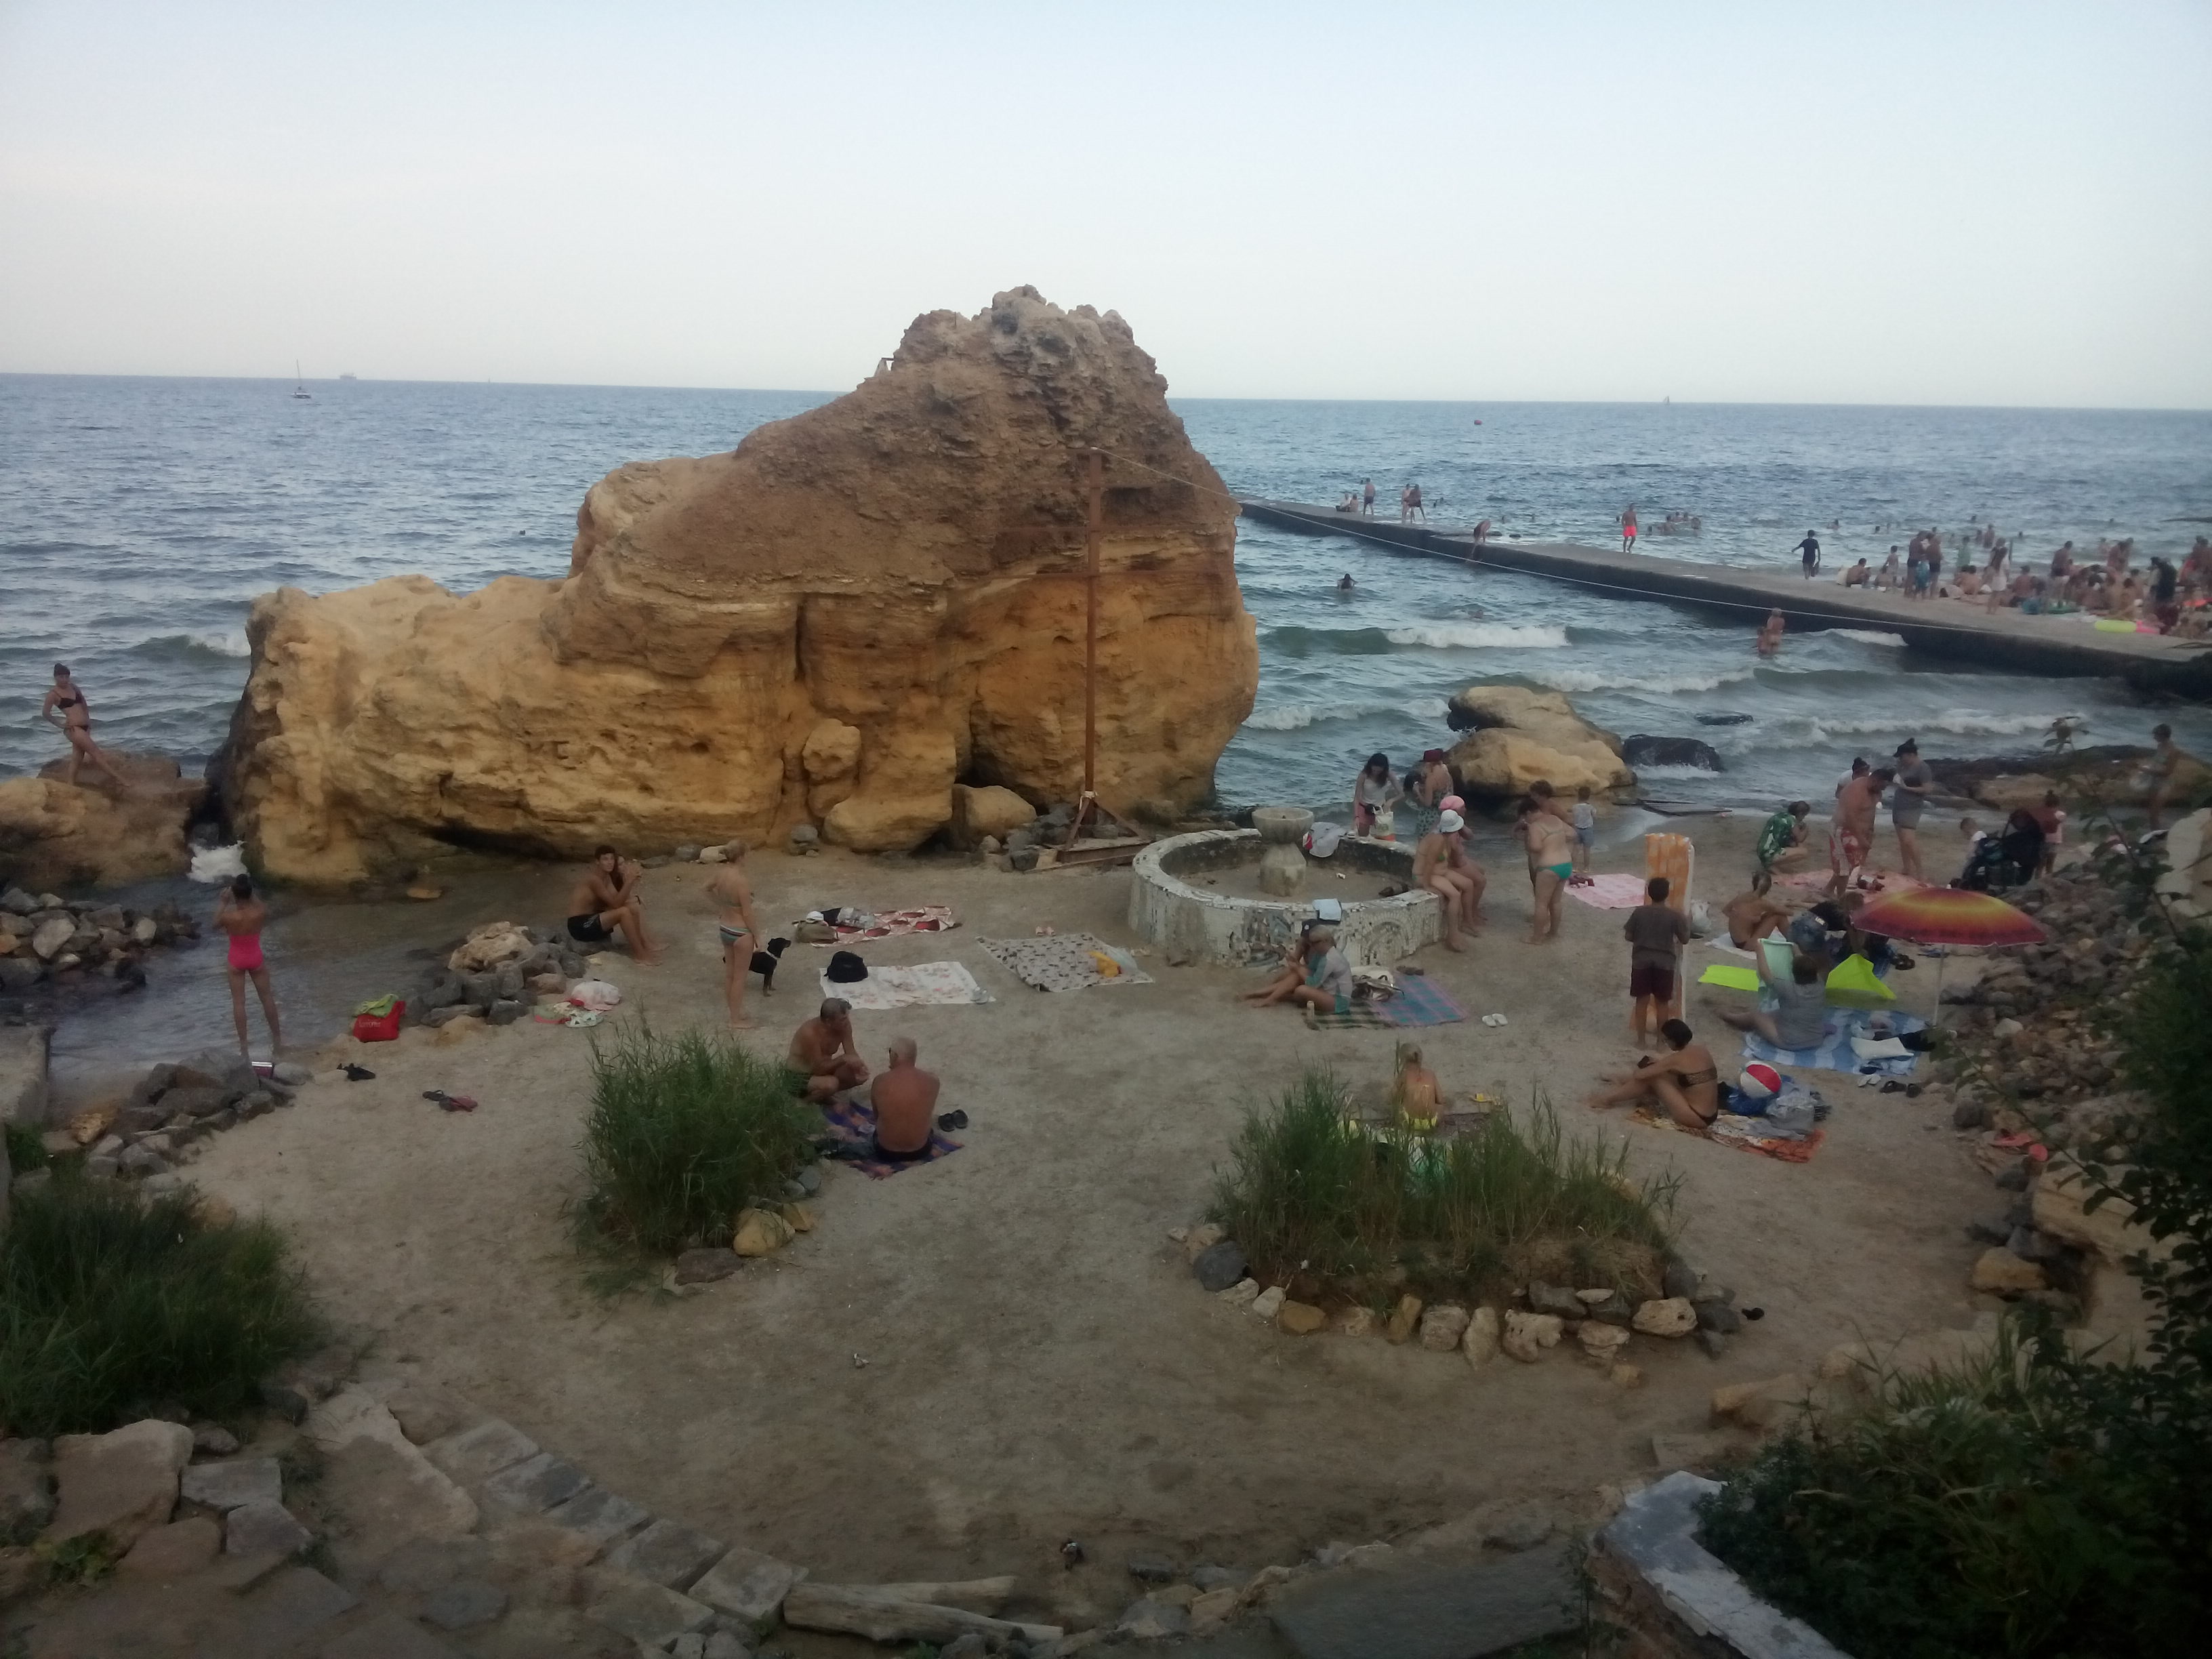 An area of beach with people sitting around and a large rock on the edge of the sea